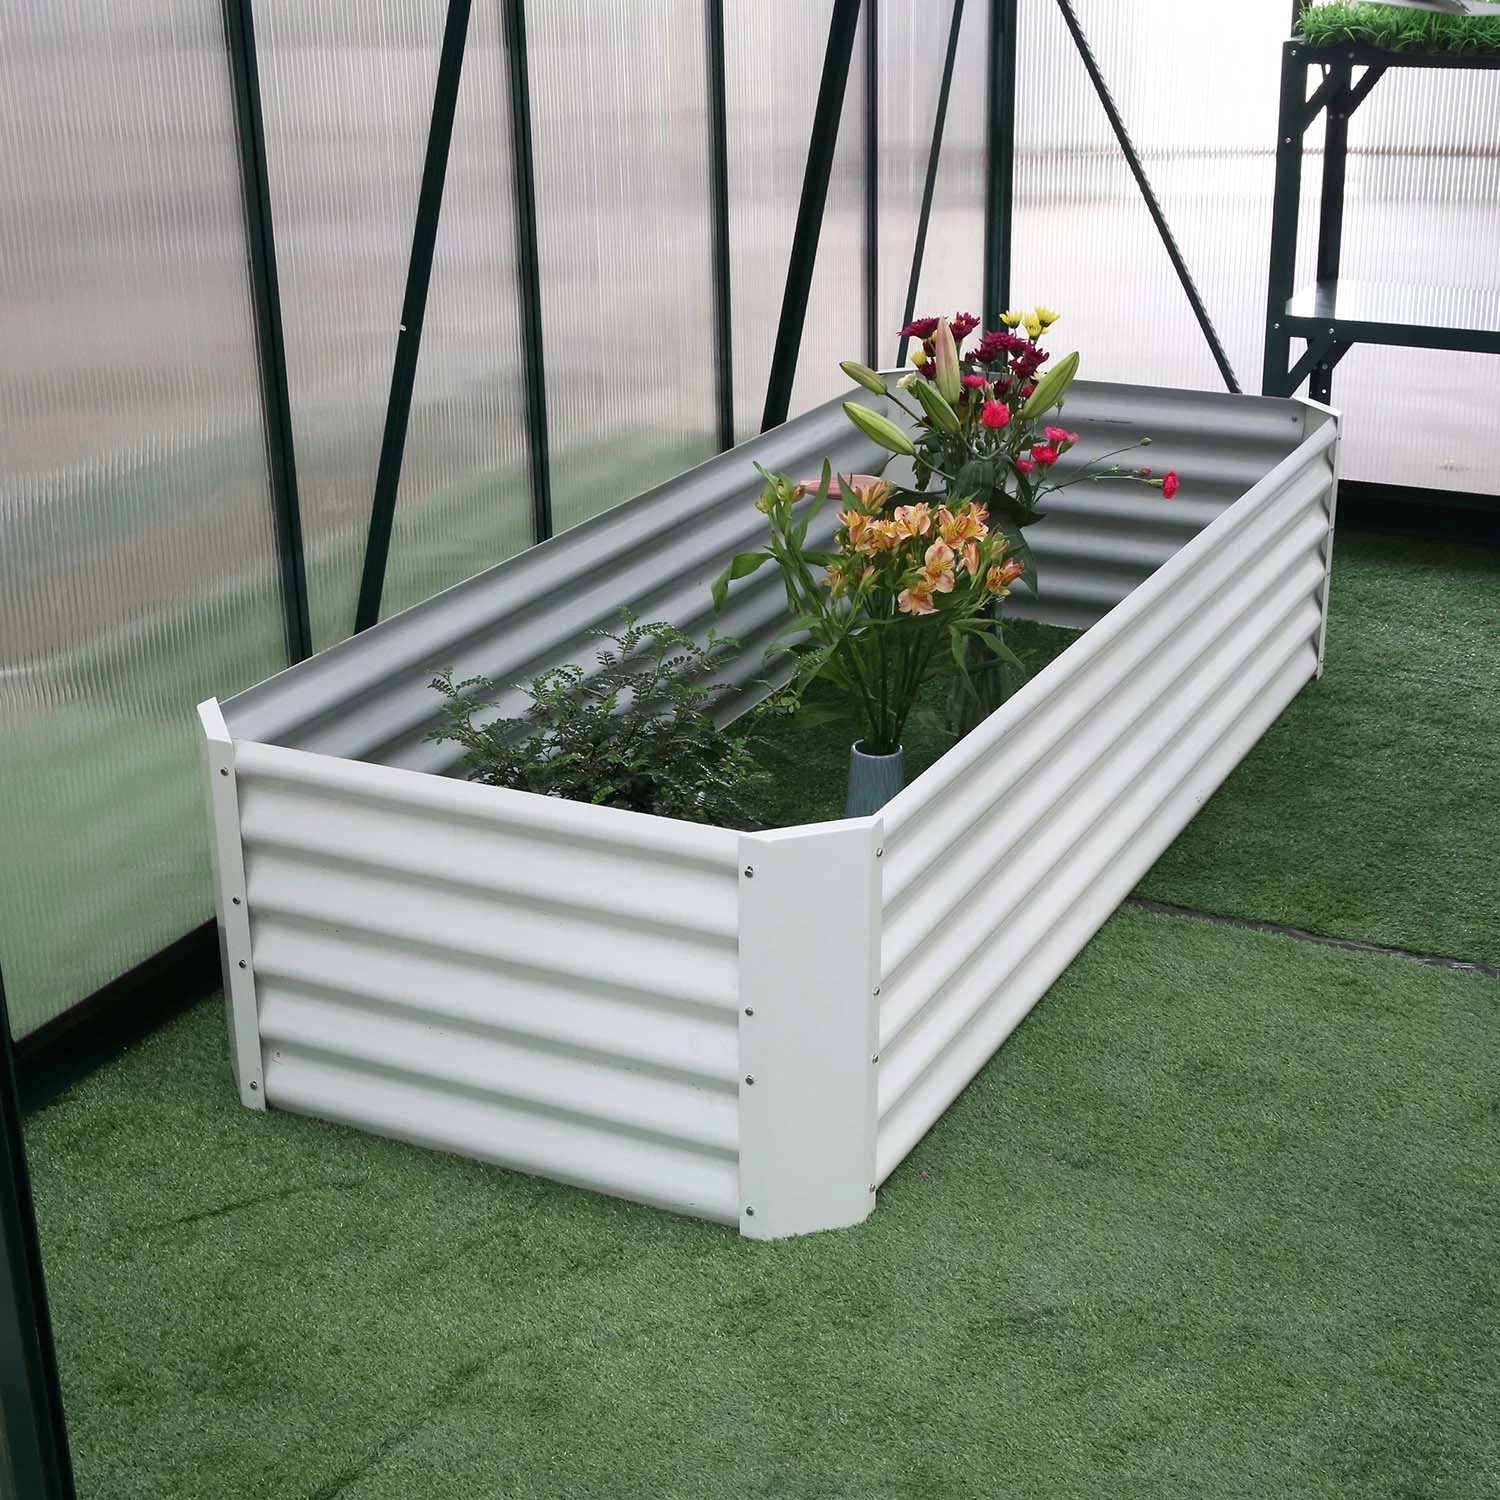 Greenhouse Use Flower Pot and Planter Rdsg1408045-Wo